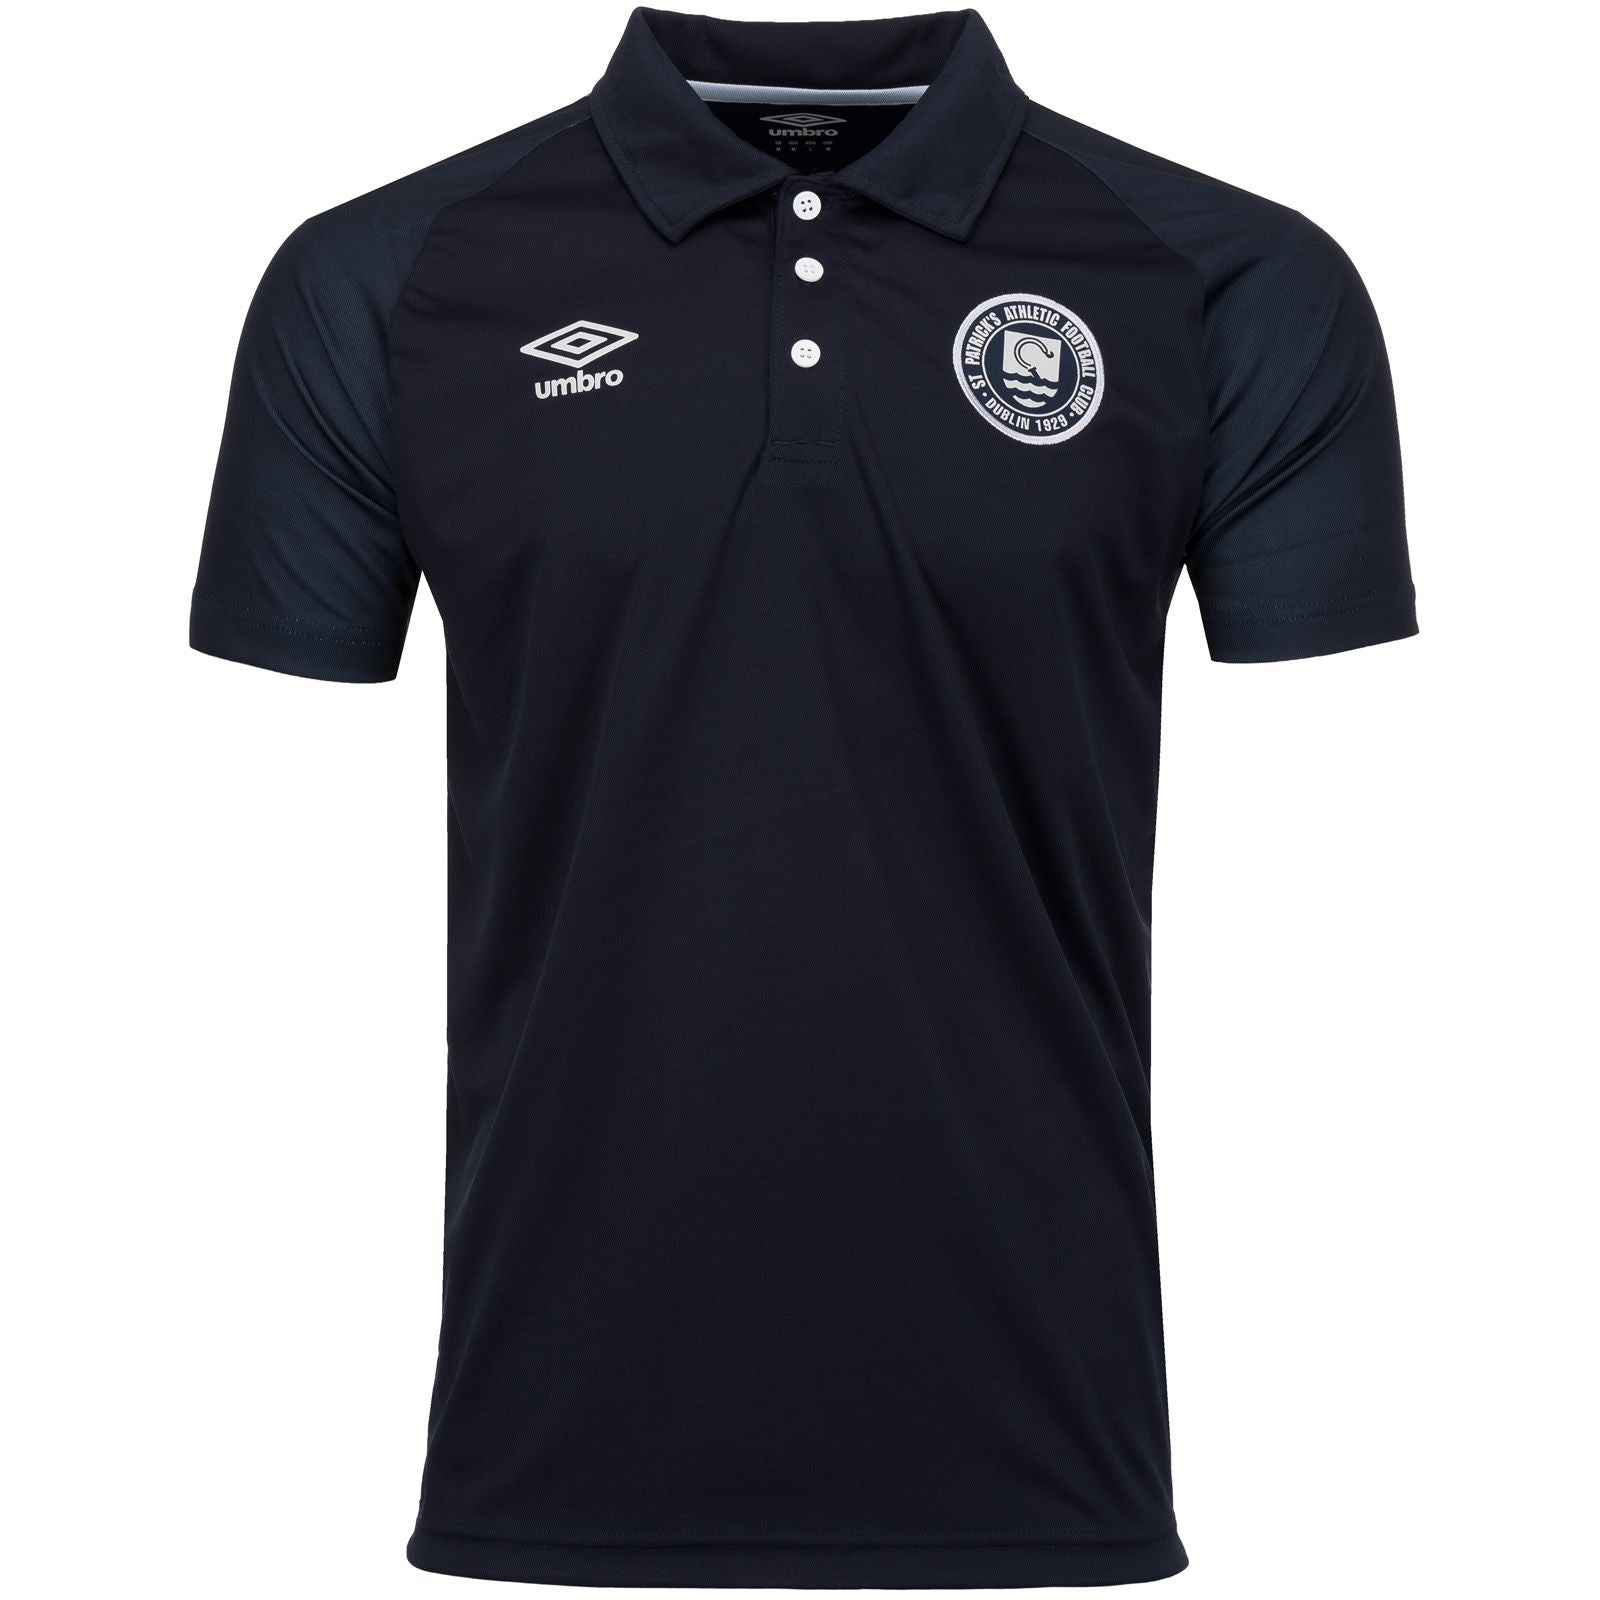 2023 Players Media Polo - Navy/Silver - Adult - (2352)